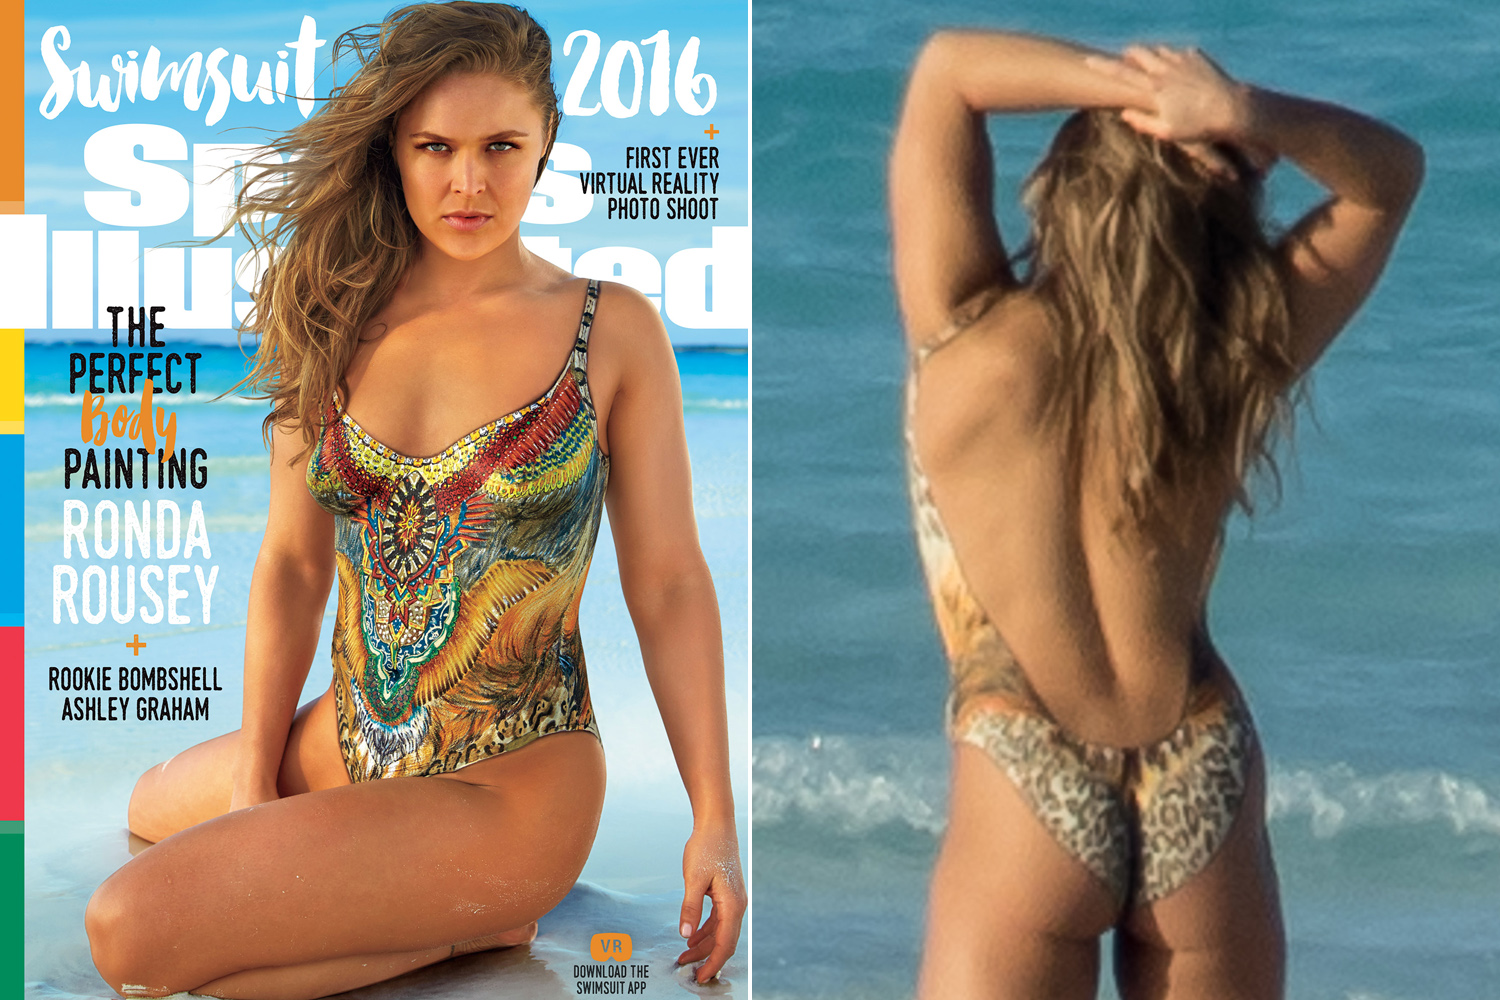 danny vorster share ronda rousey nude photoshoot photos